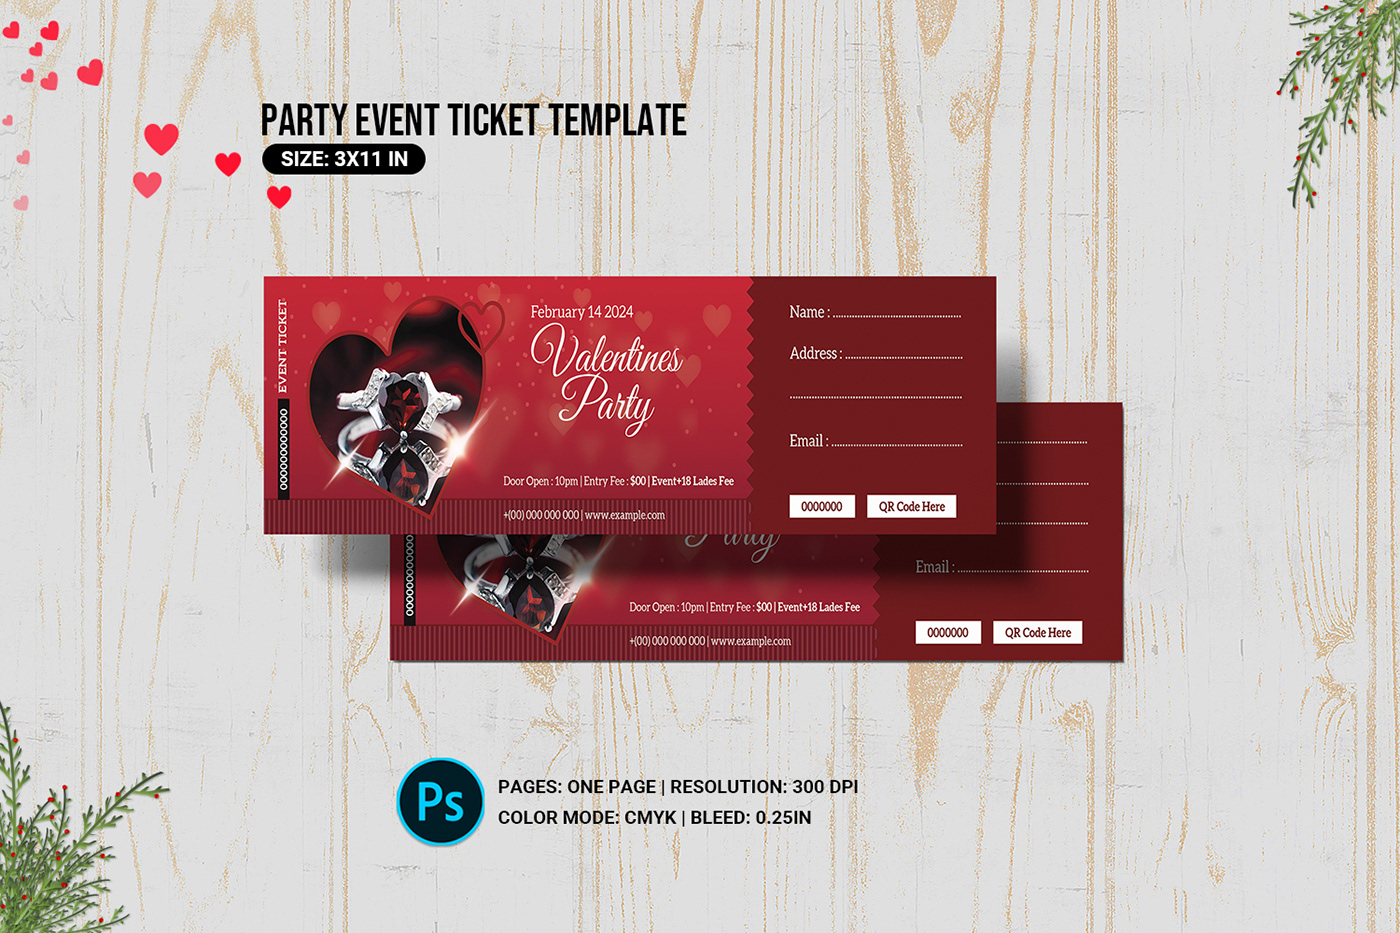 valentines day party ticket event ticket psd club dj muskc party photoshop template ticket template valentine ticket